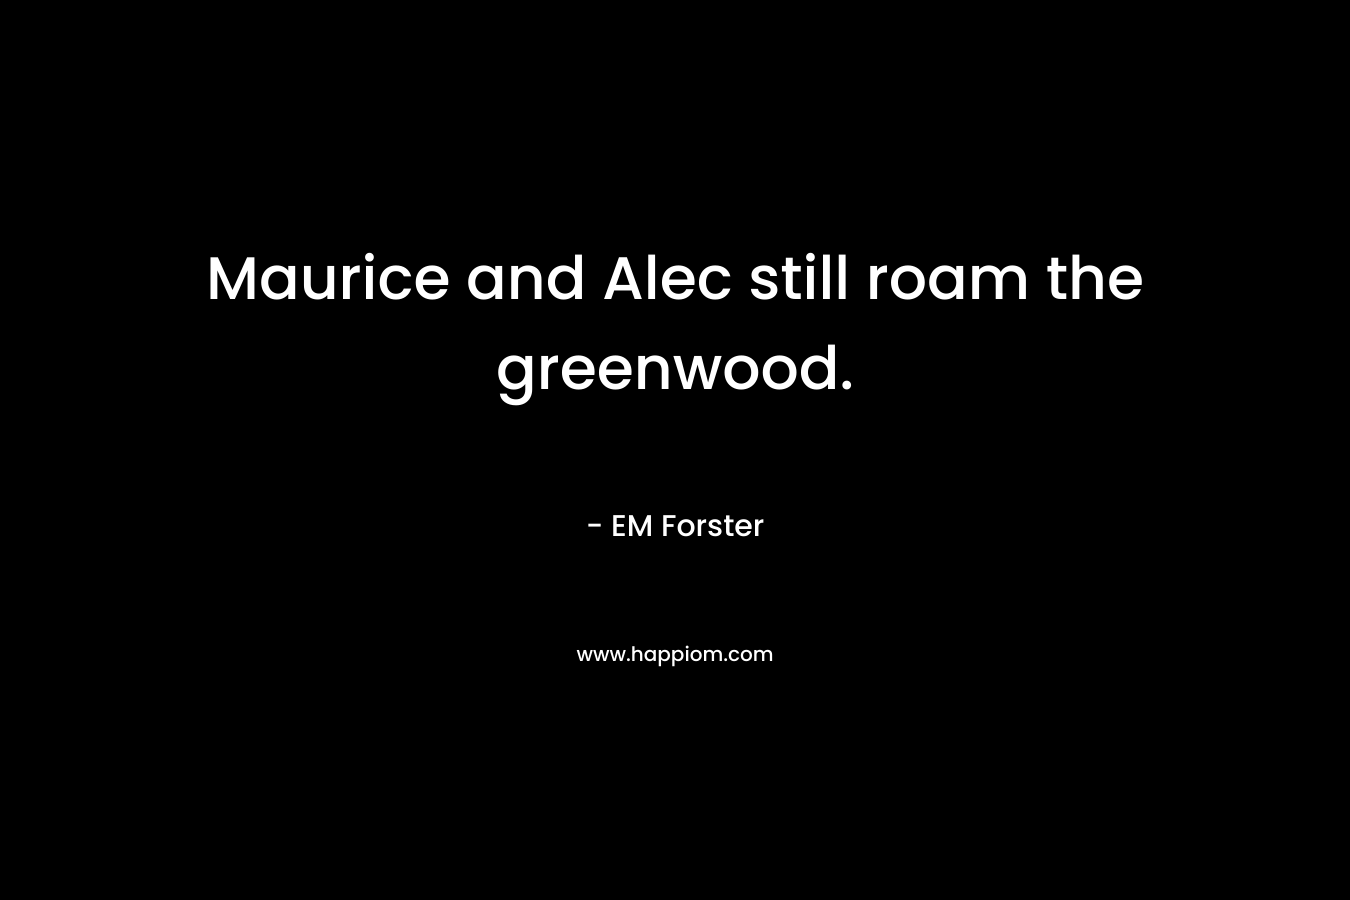 Maurice and Alec still roam the greenwood.